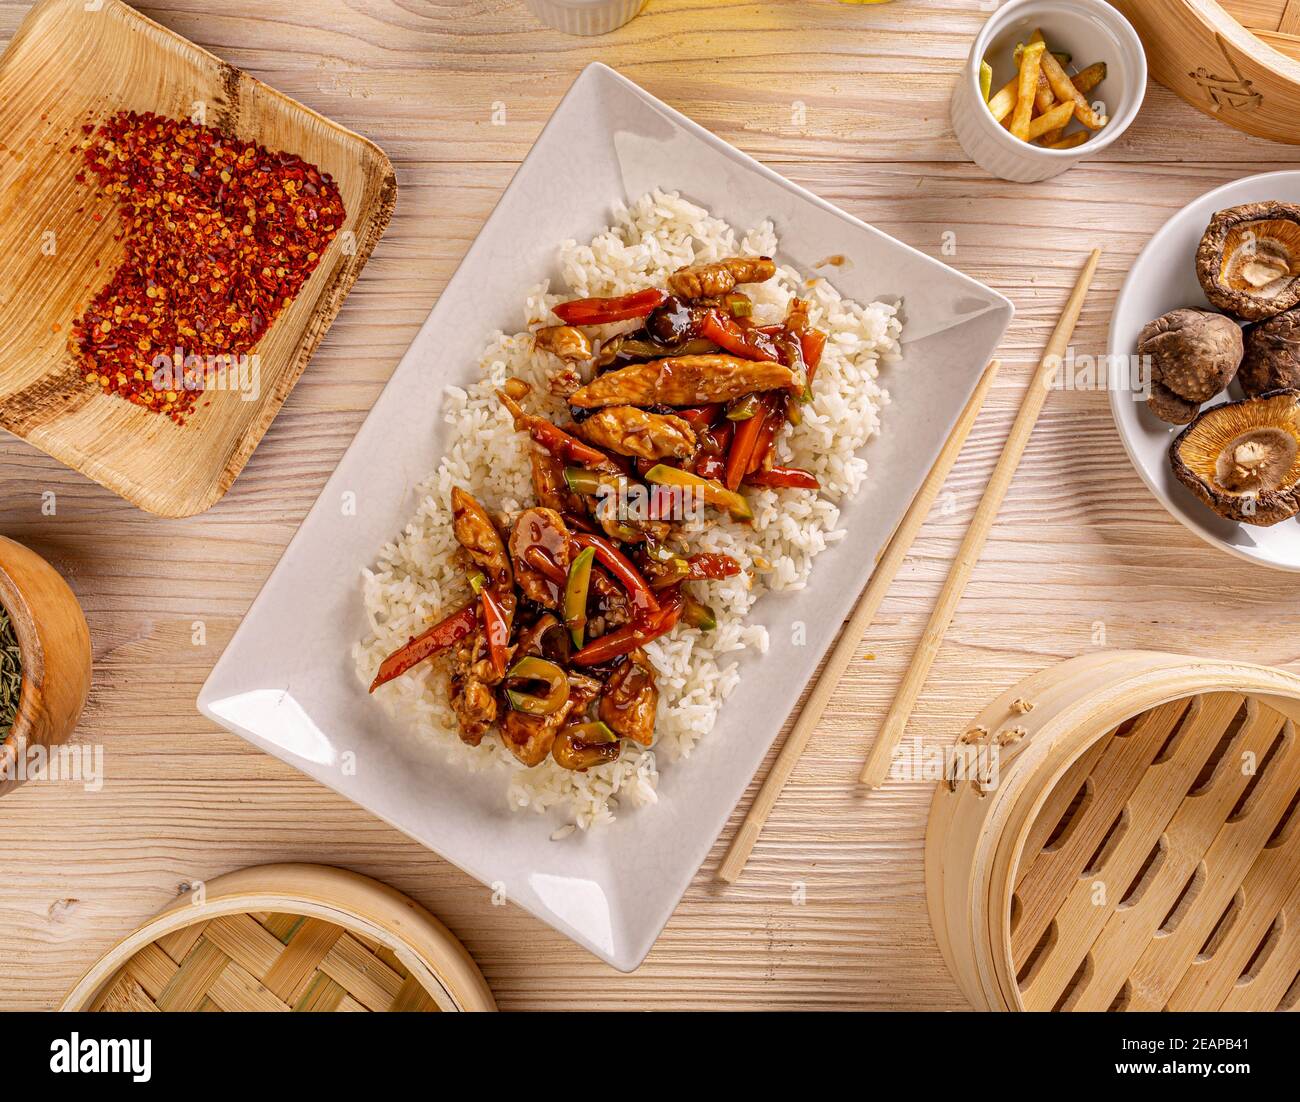 Plate of Asian food Stock Photo